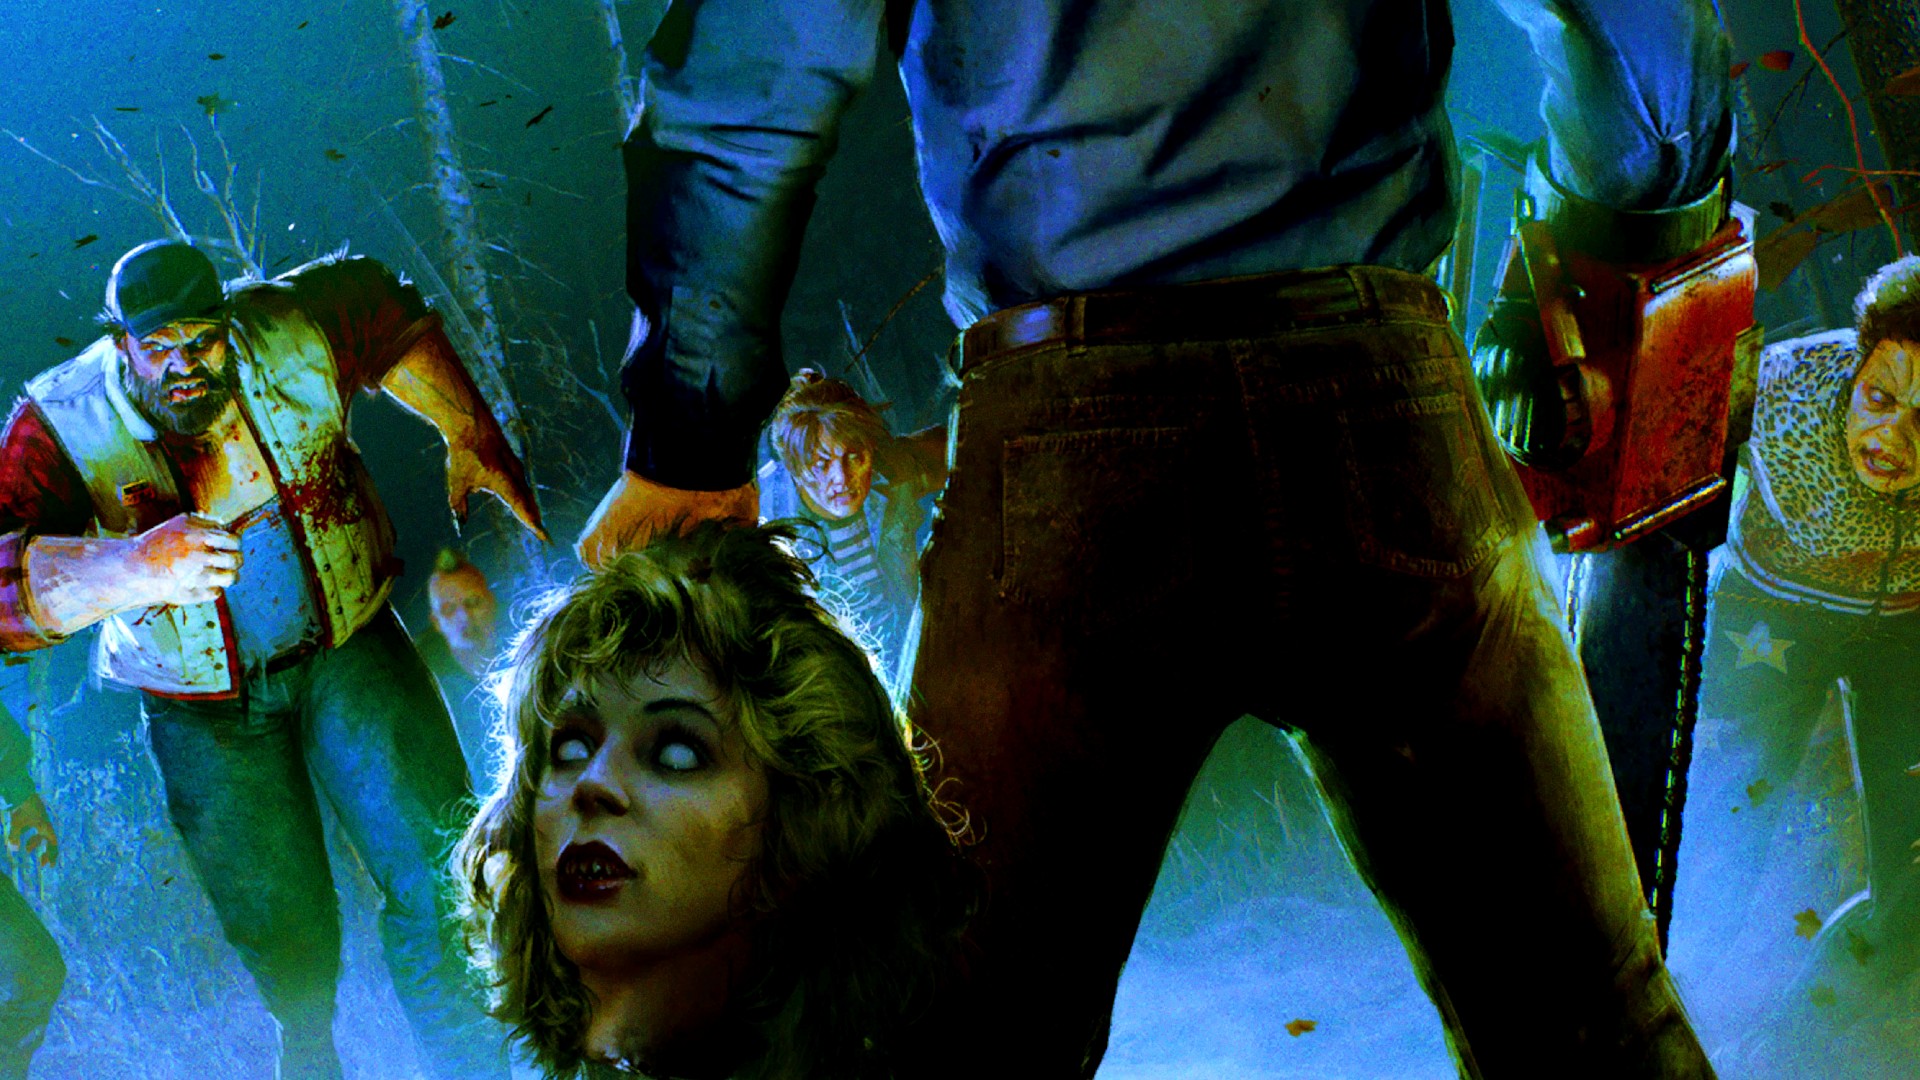 Evil Dead: The Game' Developers Detail the Storyline That Brings